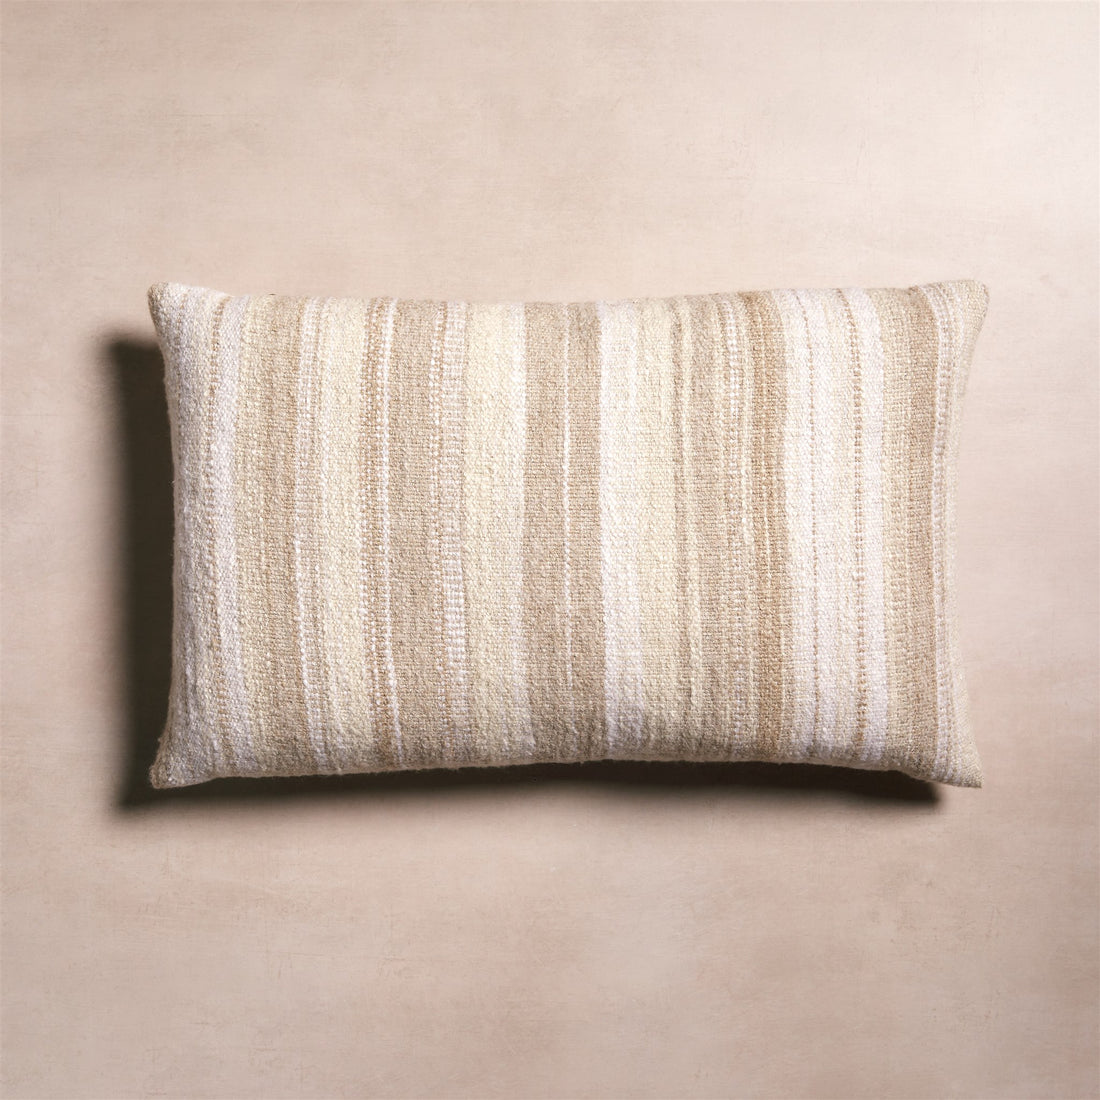 50% Off Applied at Checkout- Studio H Collection Nadine Pillow - Natural & White